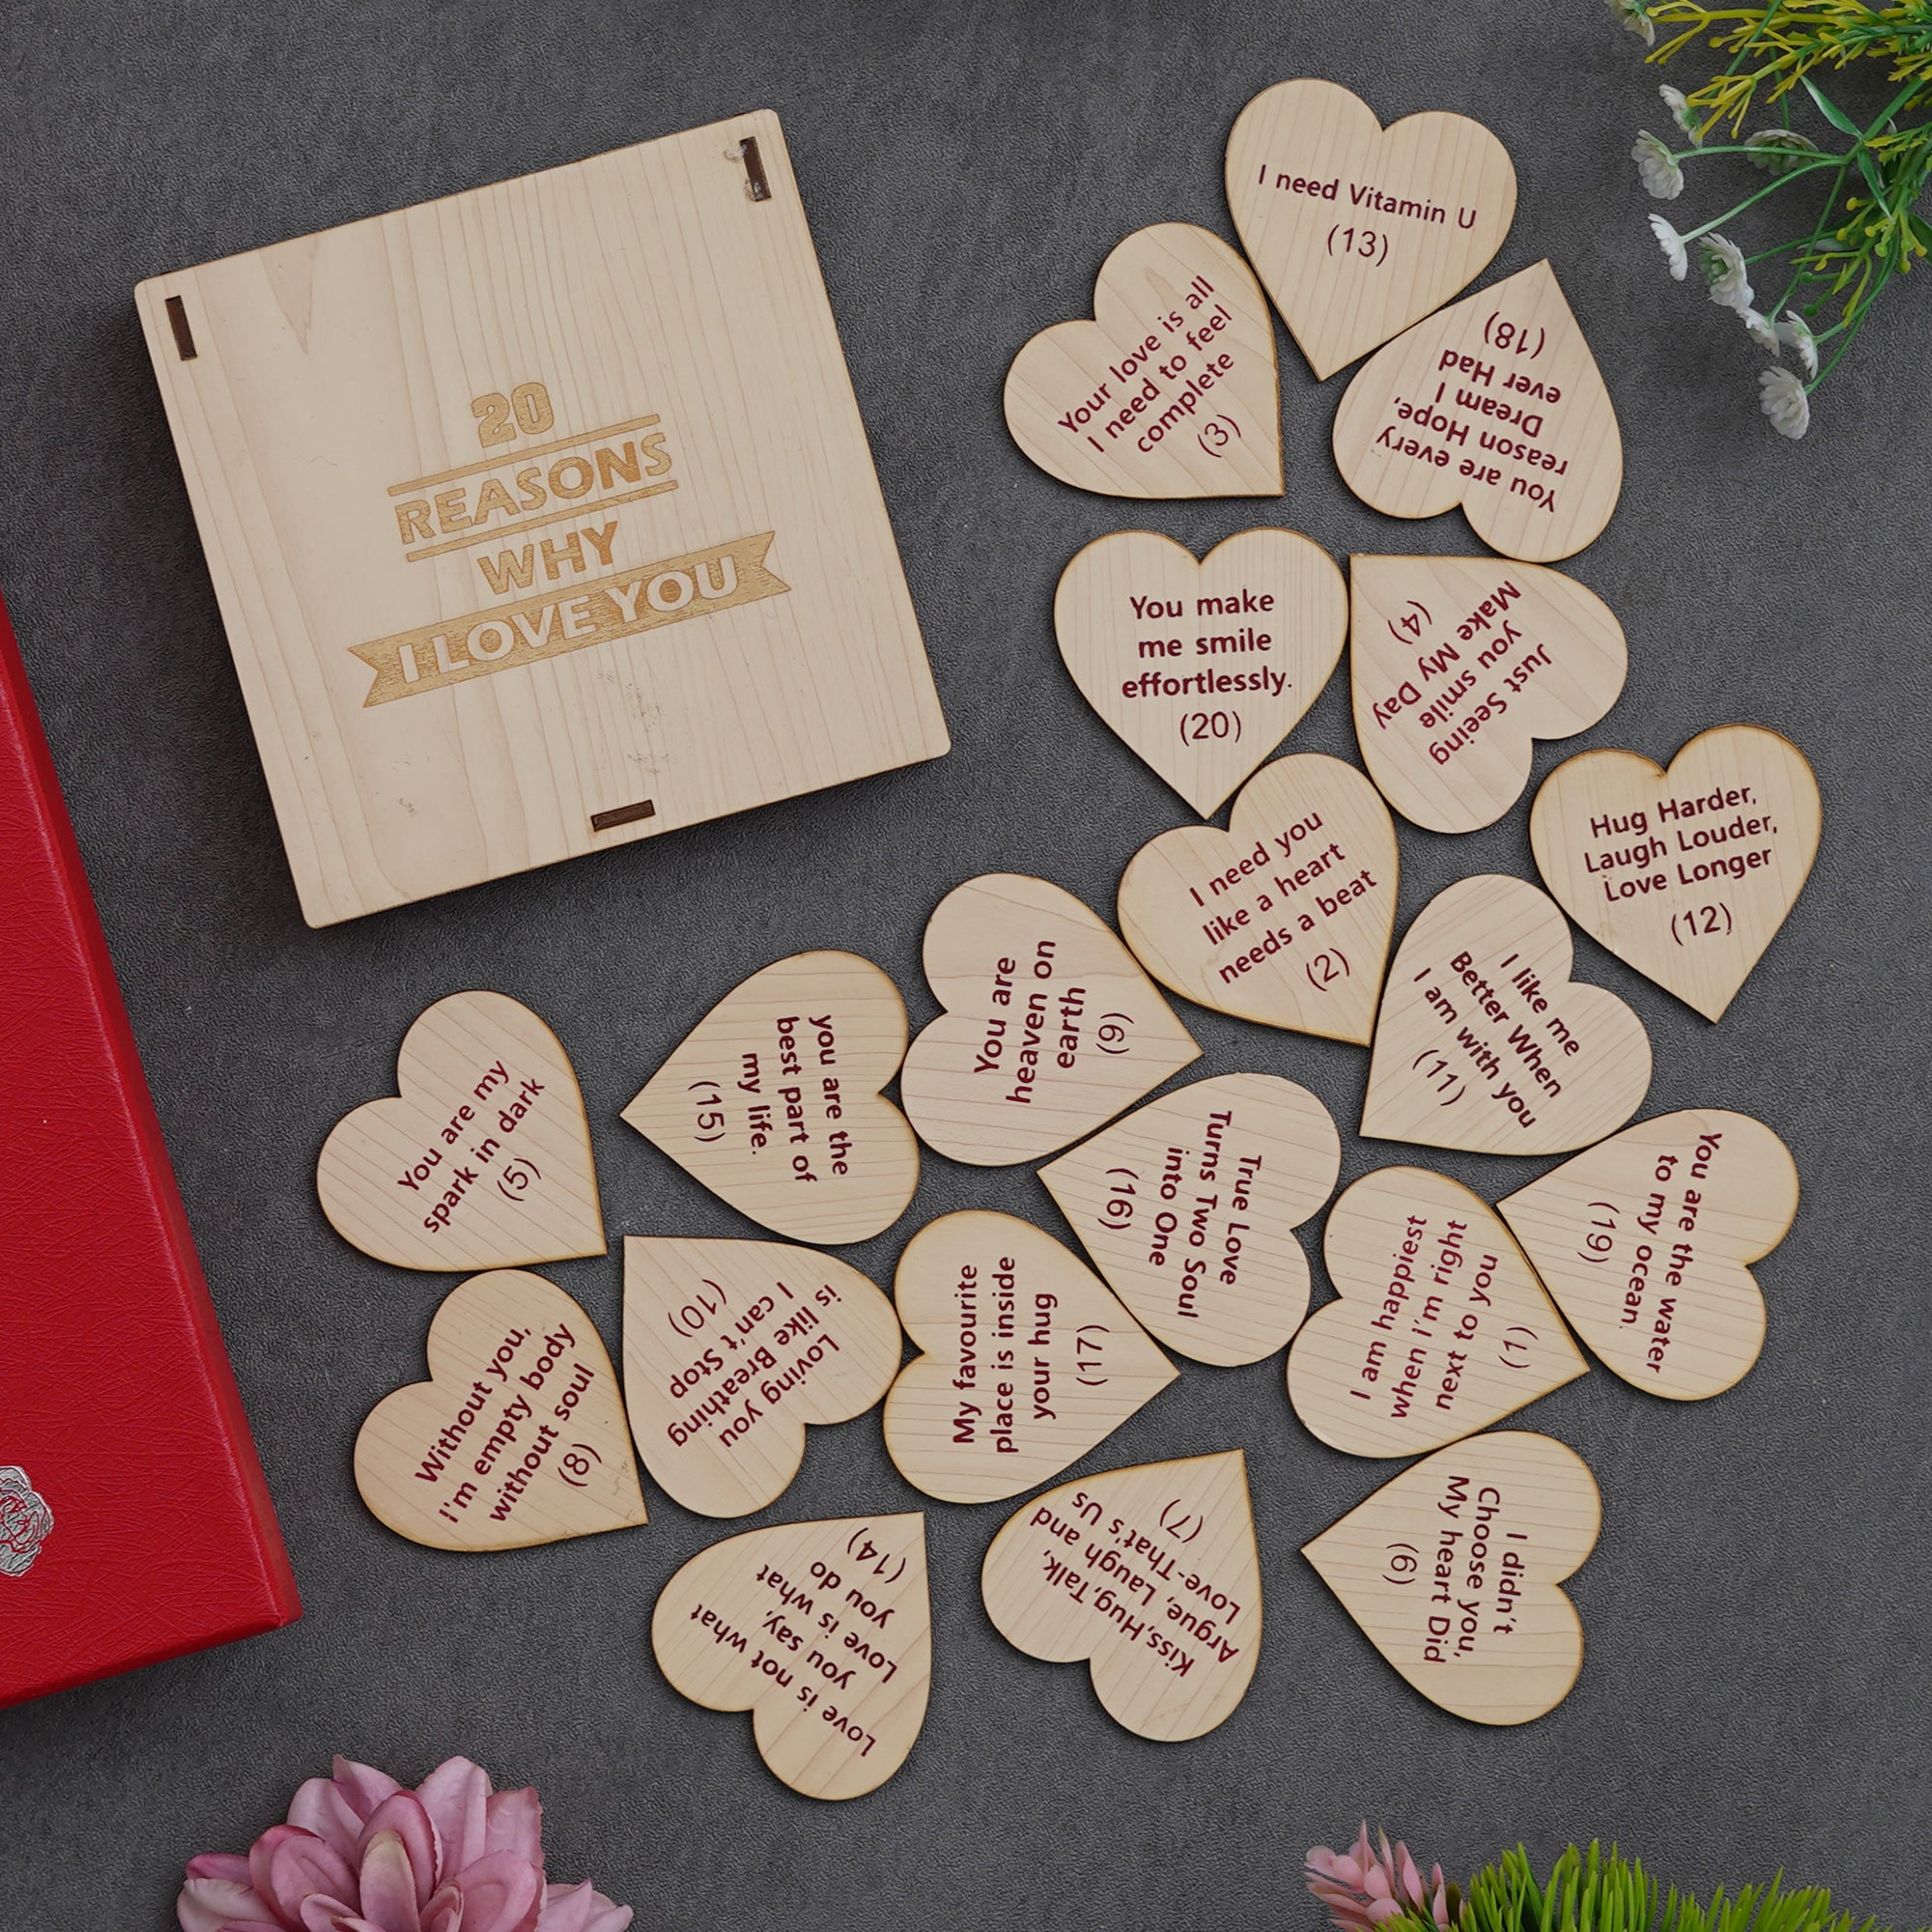 Valentine Combo of Card, "20 Reasons Why I Love You" Printed on Little Hearts Wooden Gift Set, Pink Heart Shaped Gift Box with Teddy and Roses 3